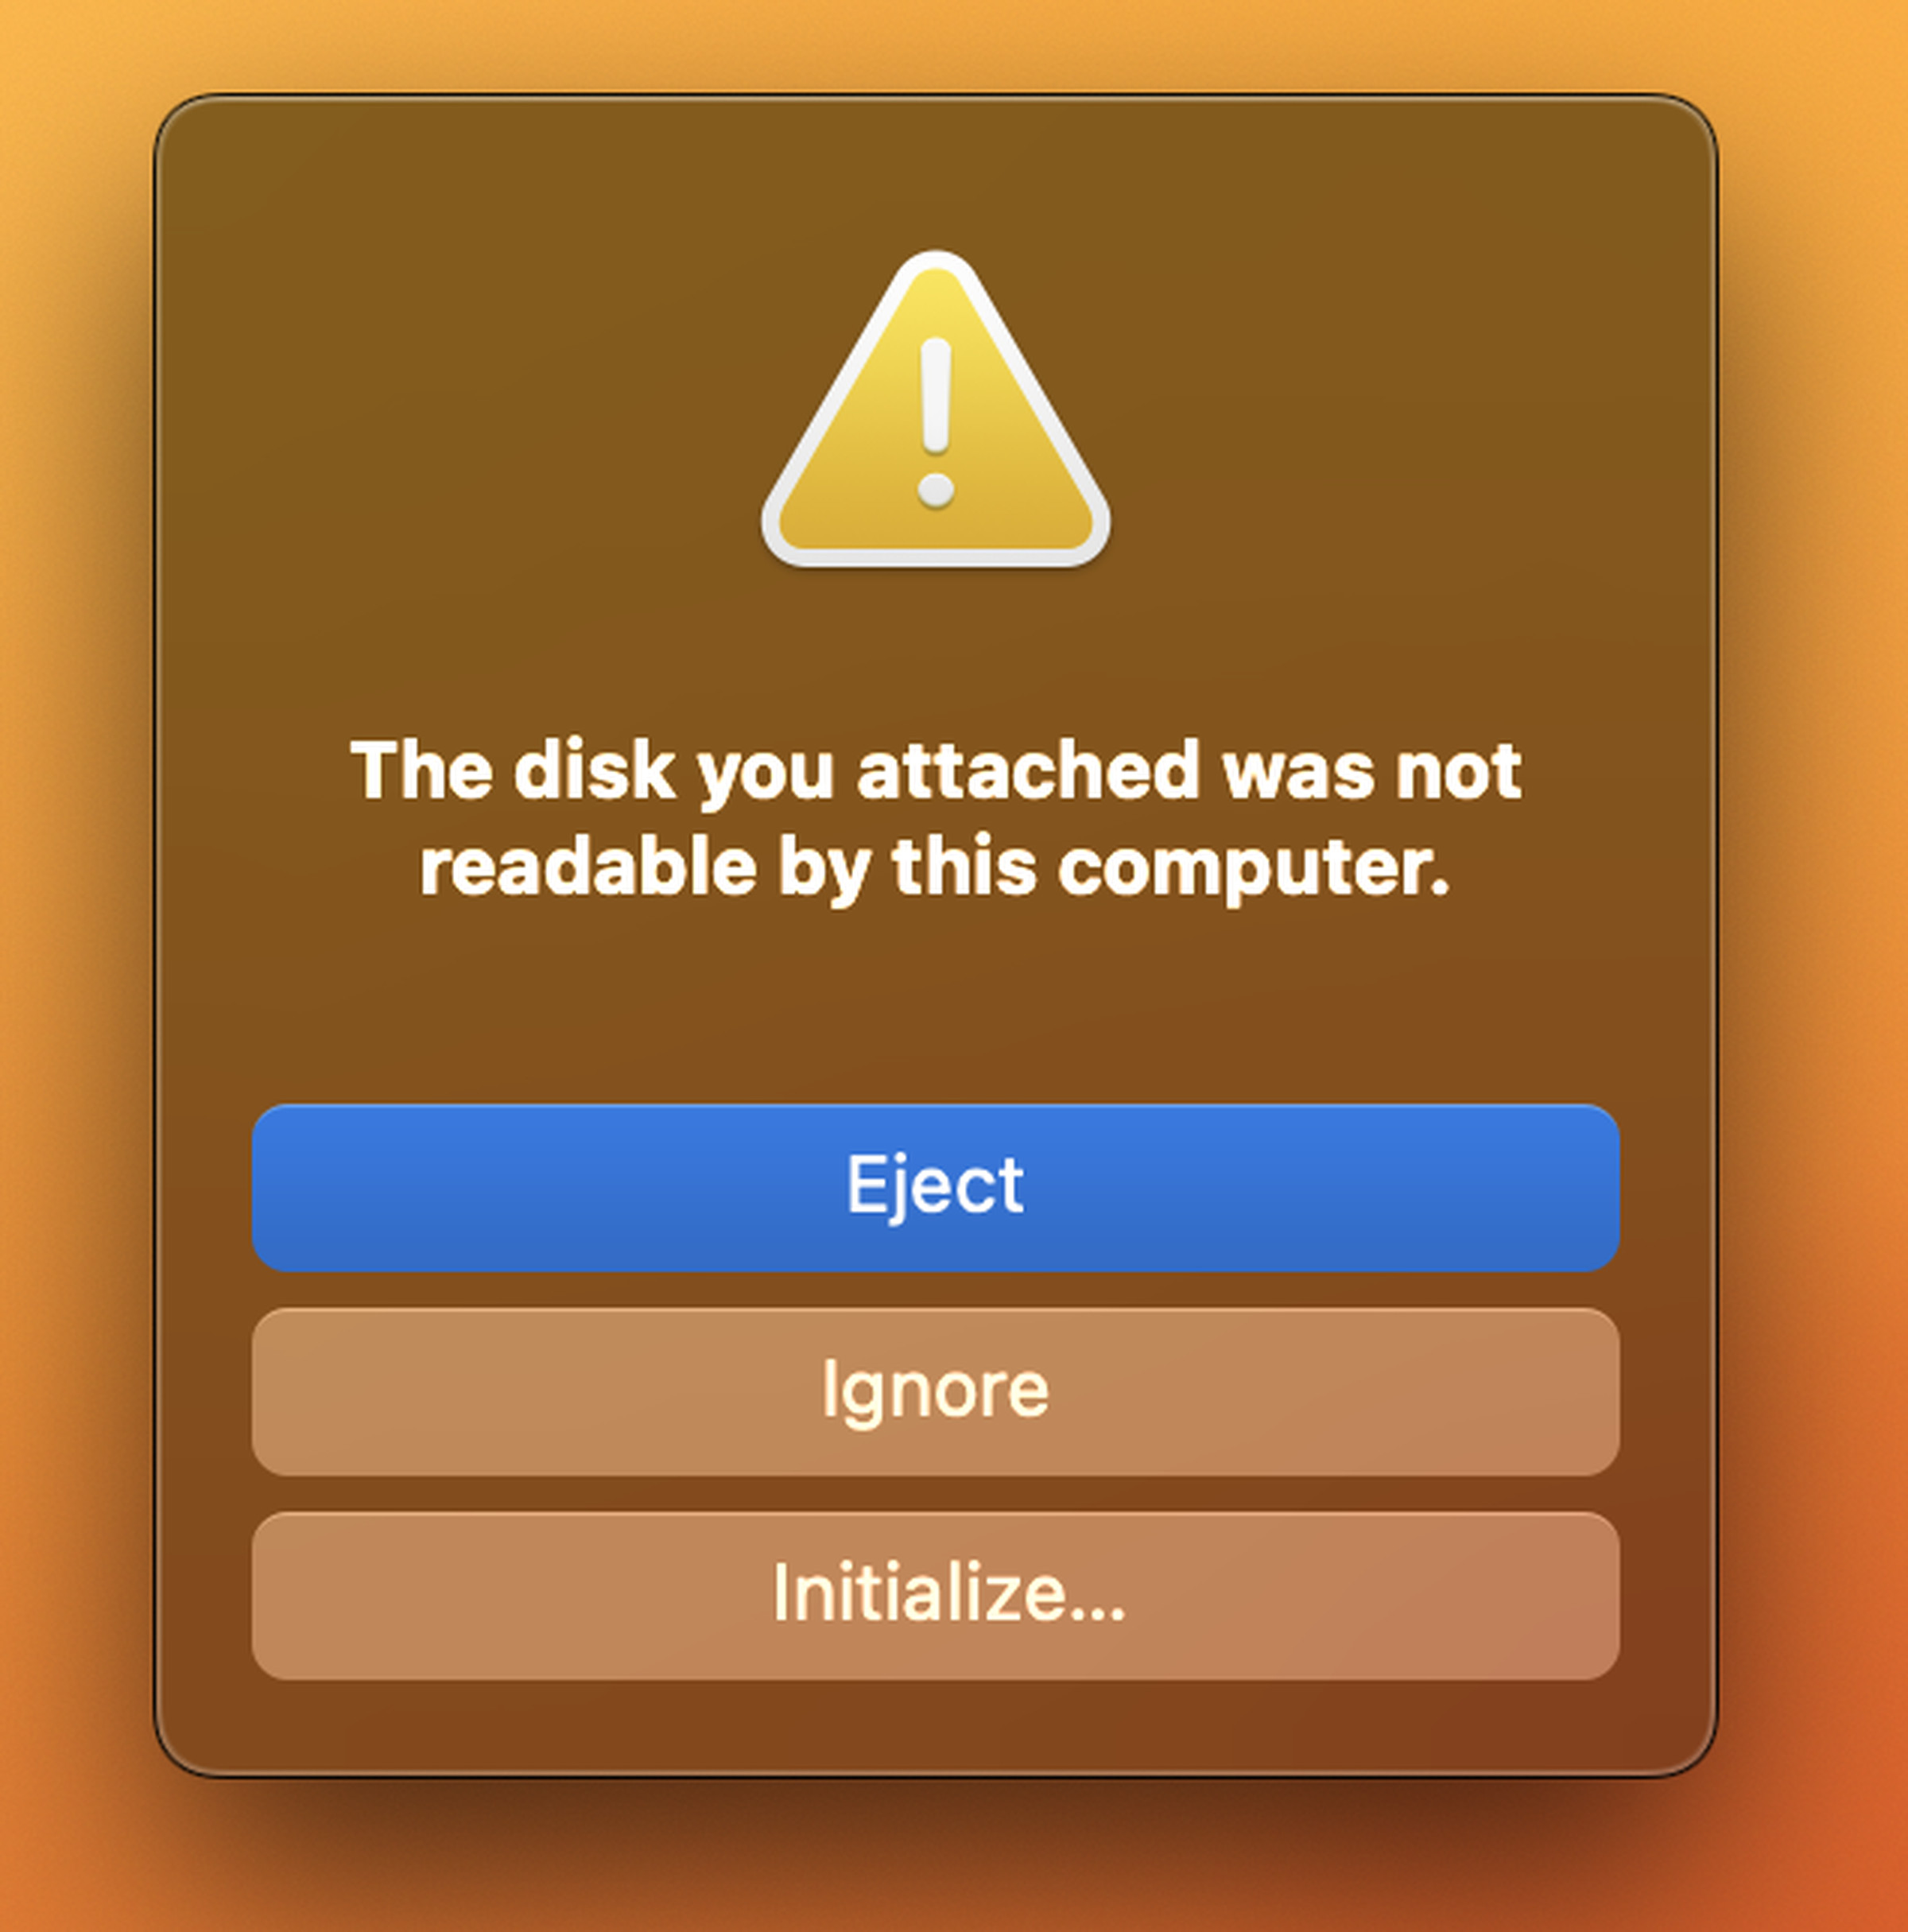 “The disk you attached was not readable by this computer.”